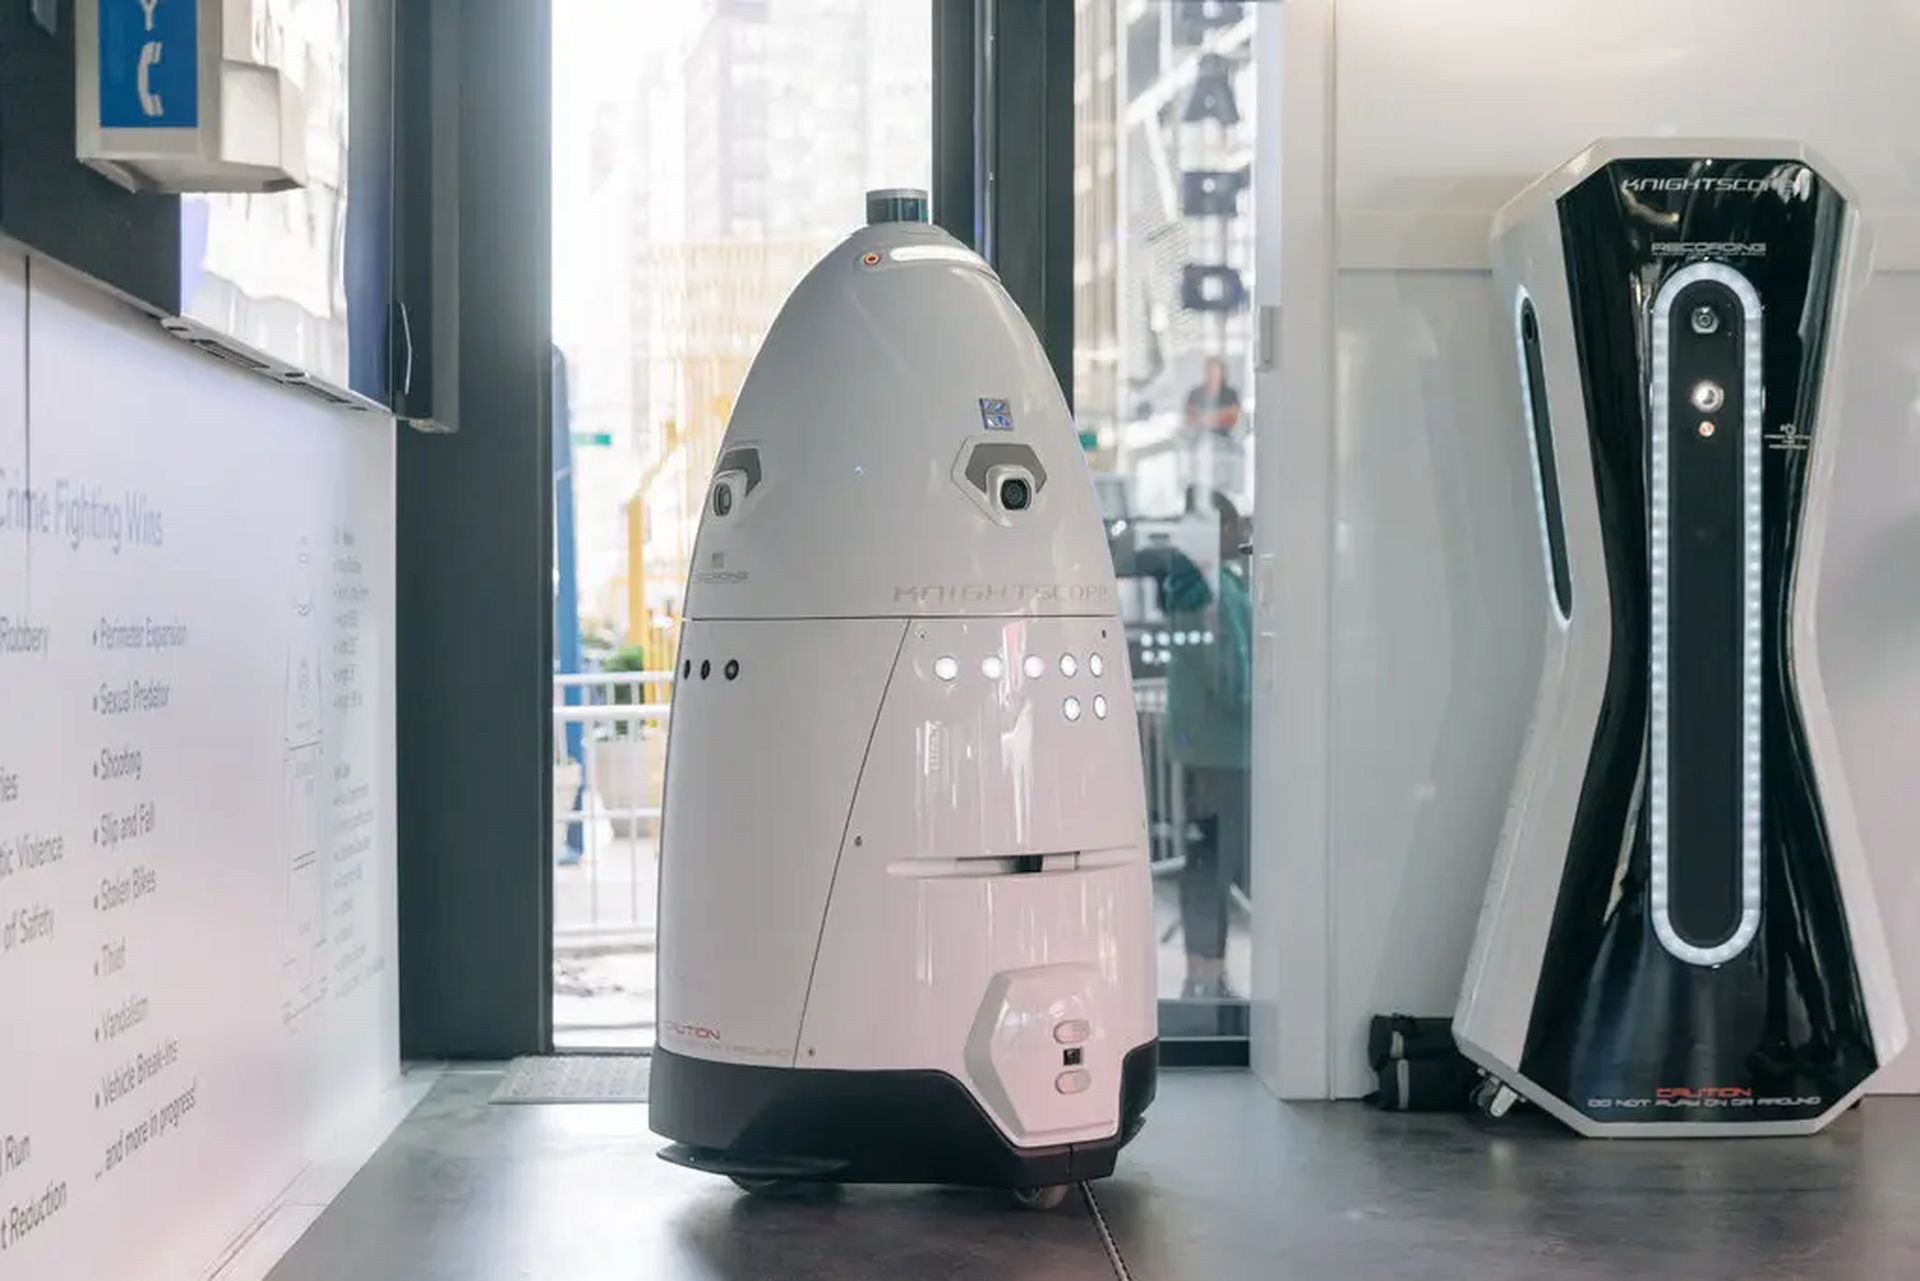 NYC police test crime-fighting robots